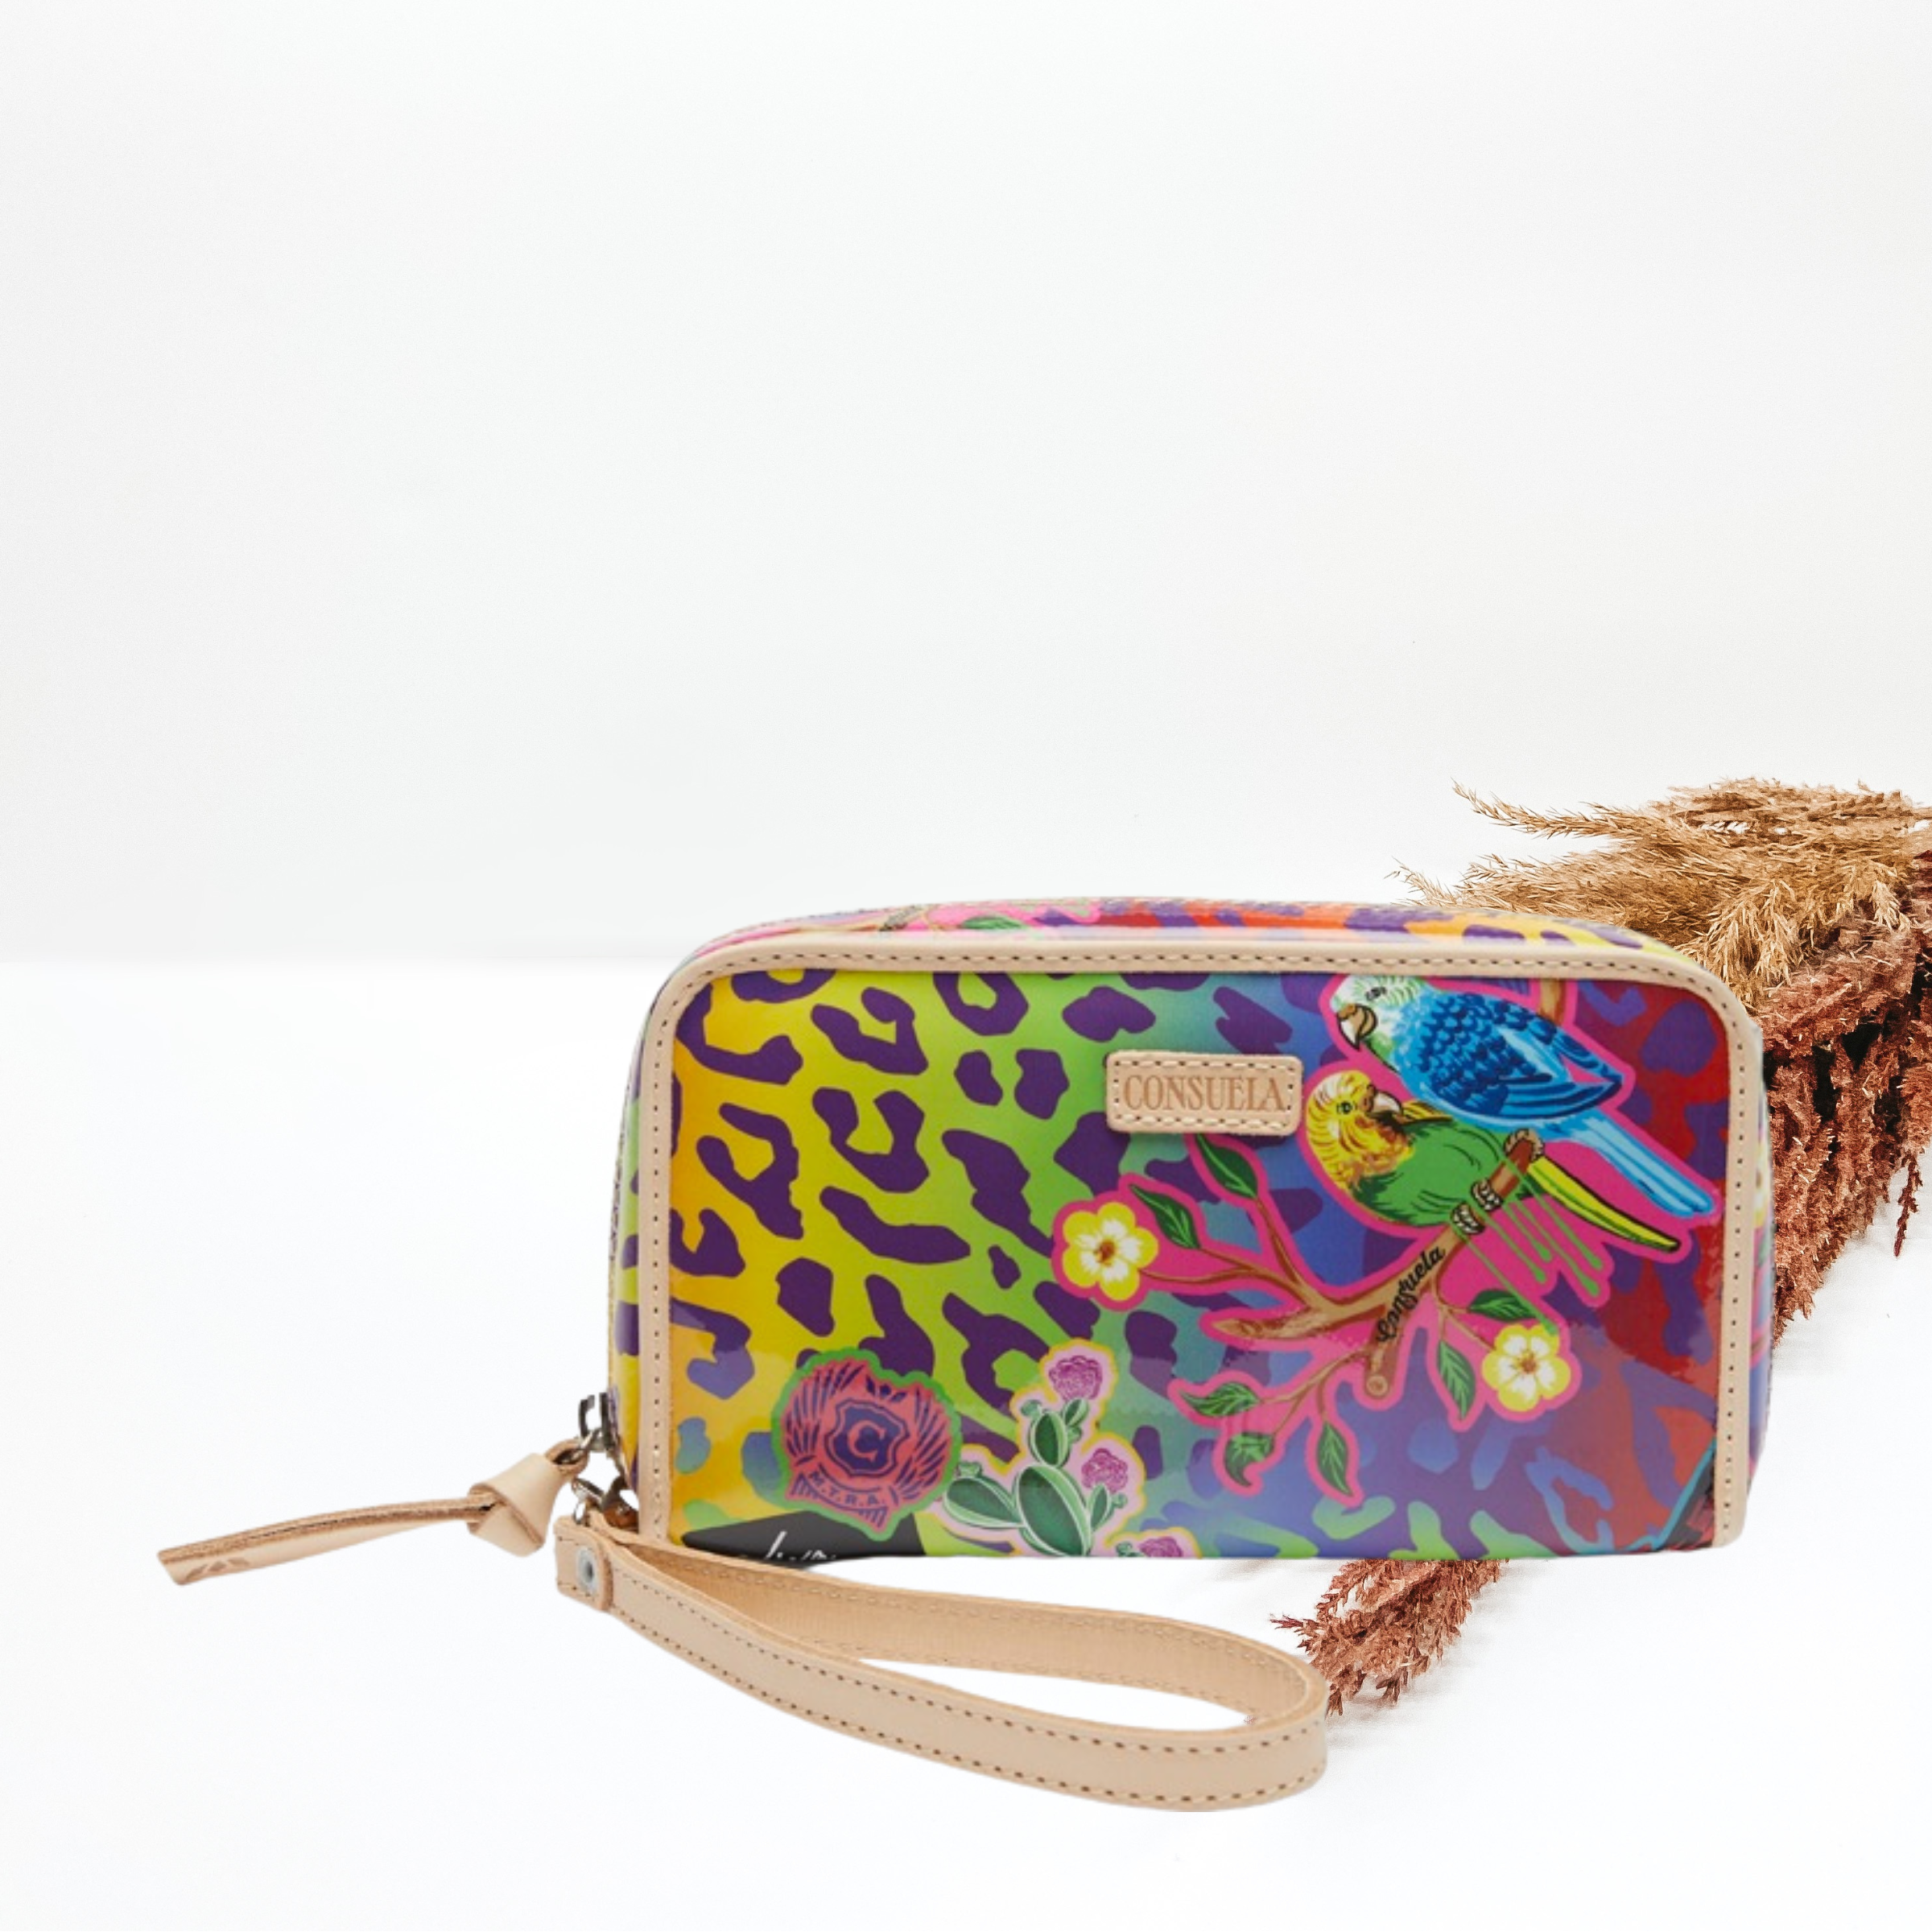 In the middle of the picture is a wristlet wallet in a rainbow leopard with different designs including a parrot and flowers. Background is white. 